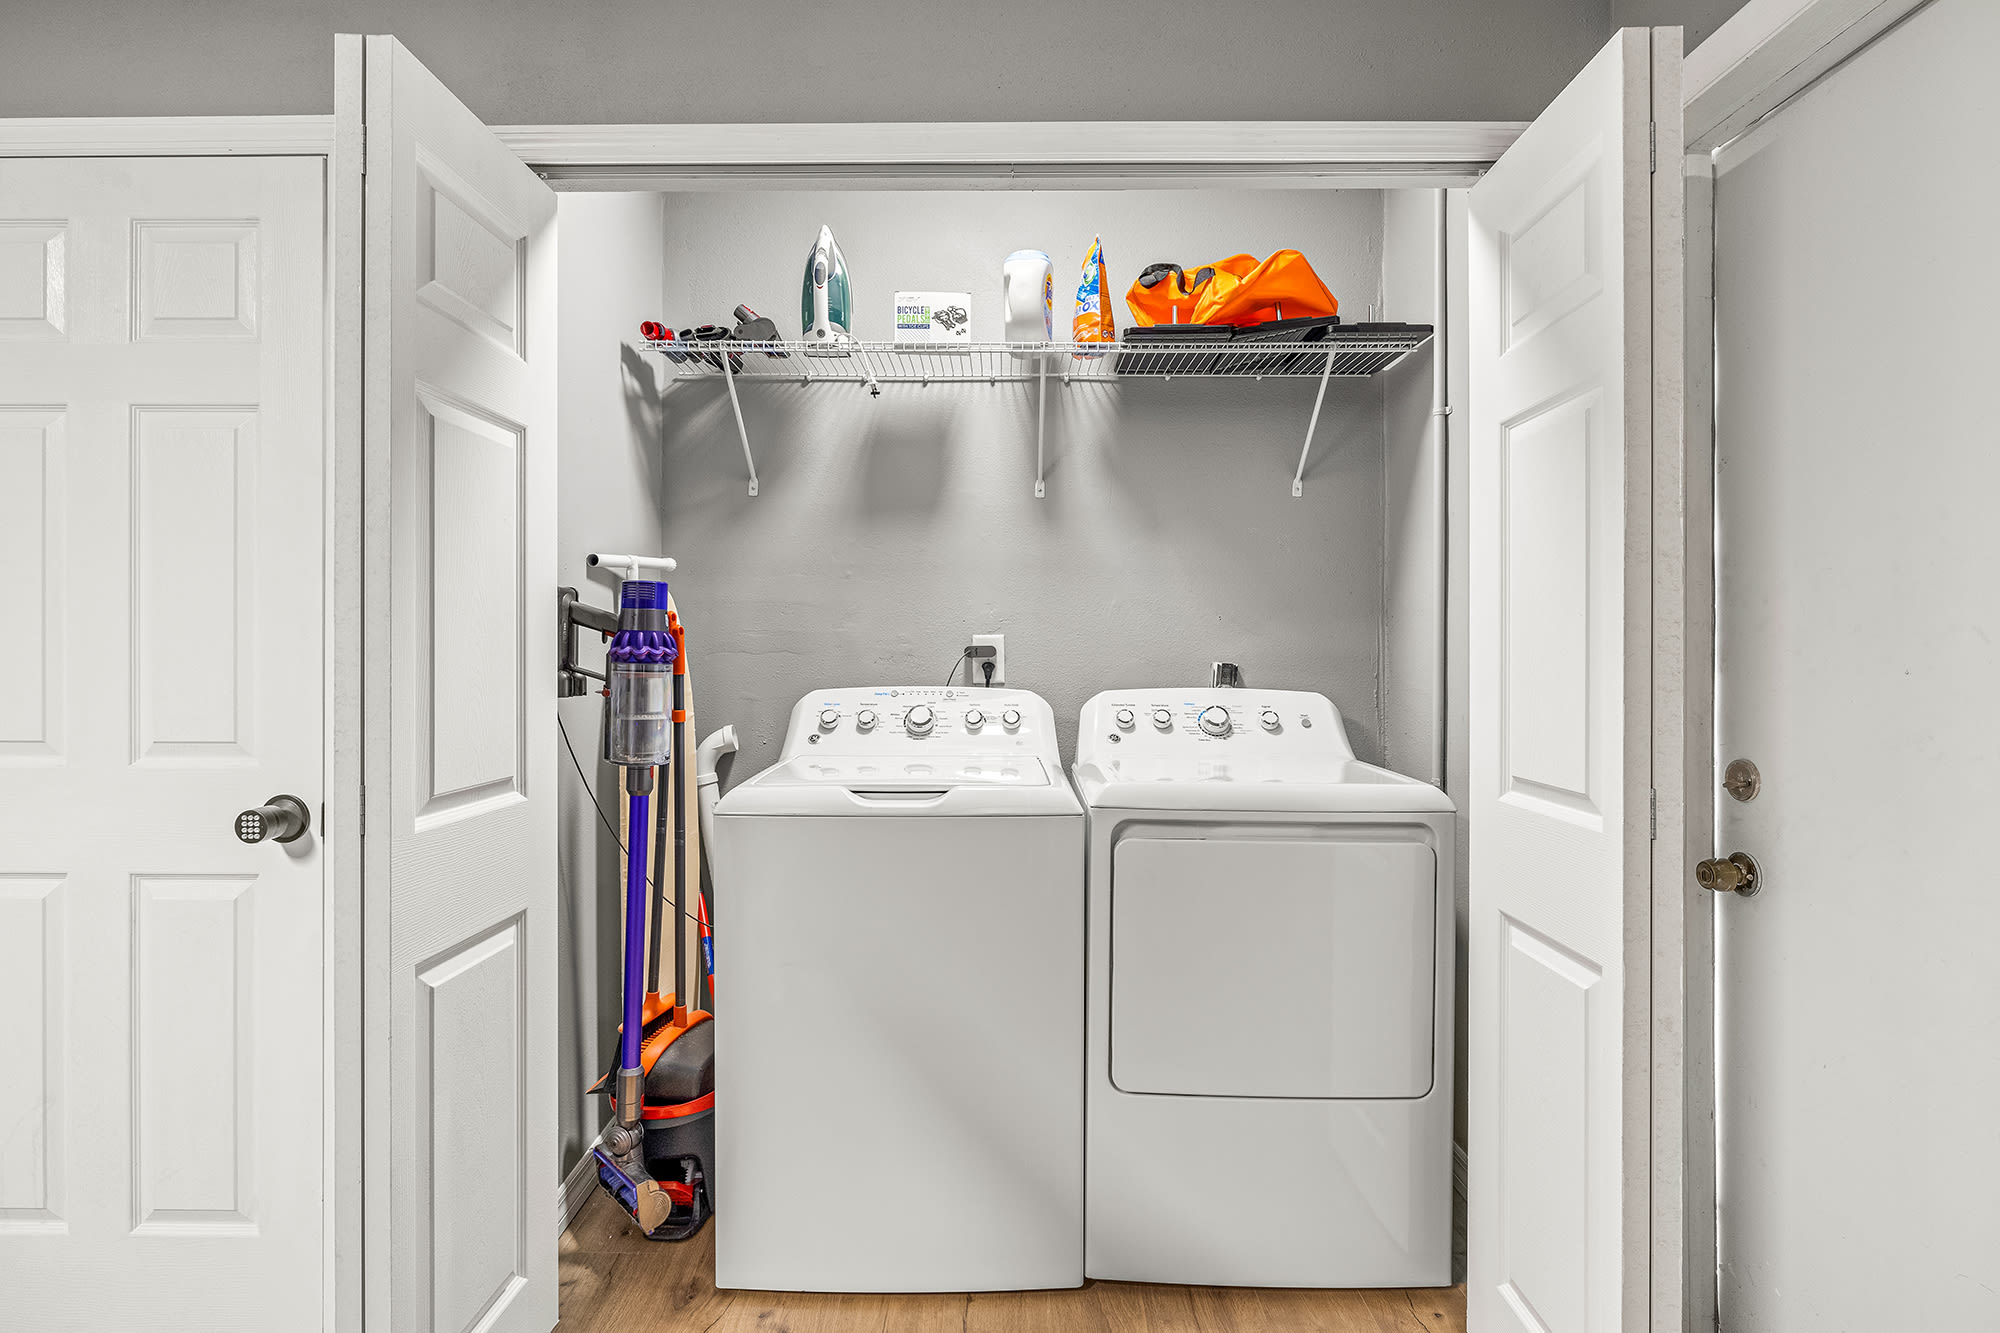 In unit washer and dryer with Dyson Vacuum, laundry detergent, and iron.